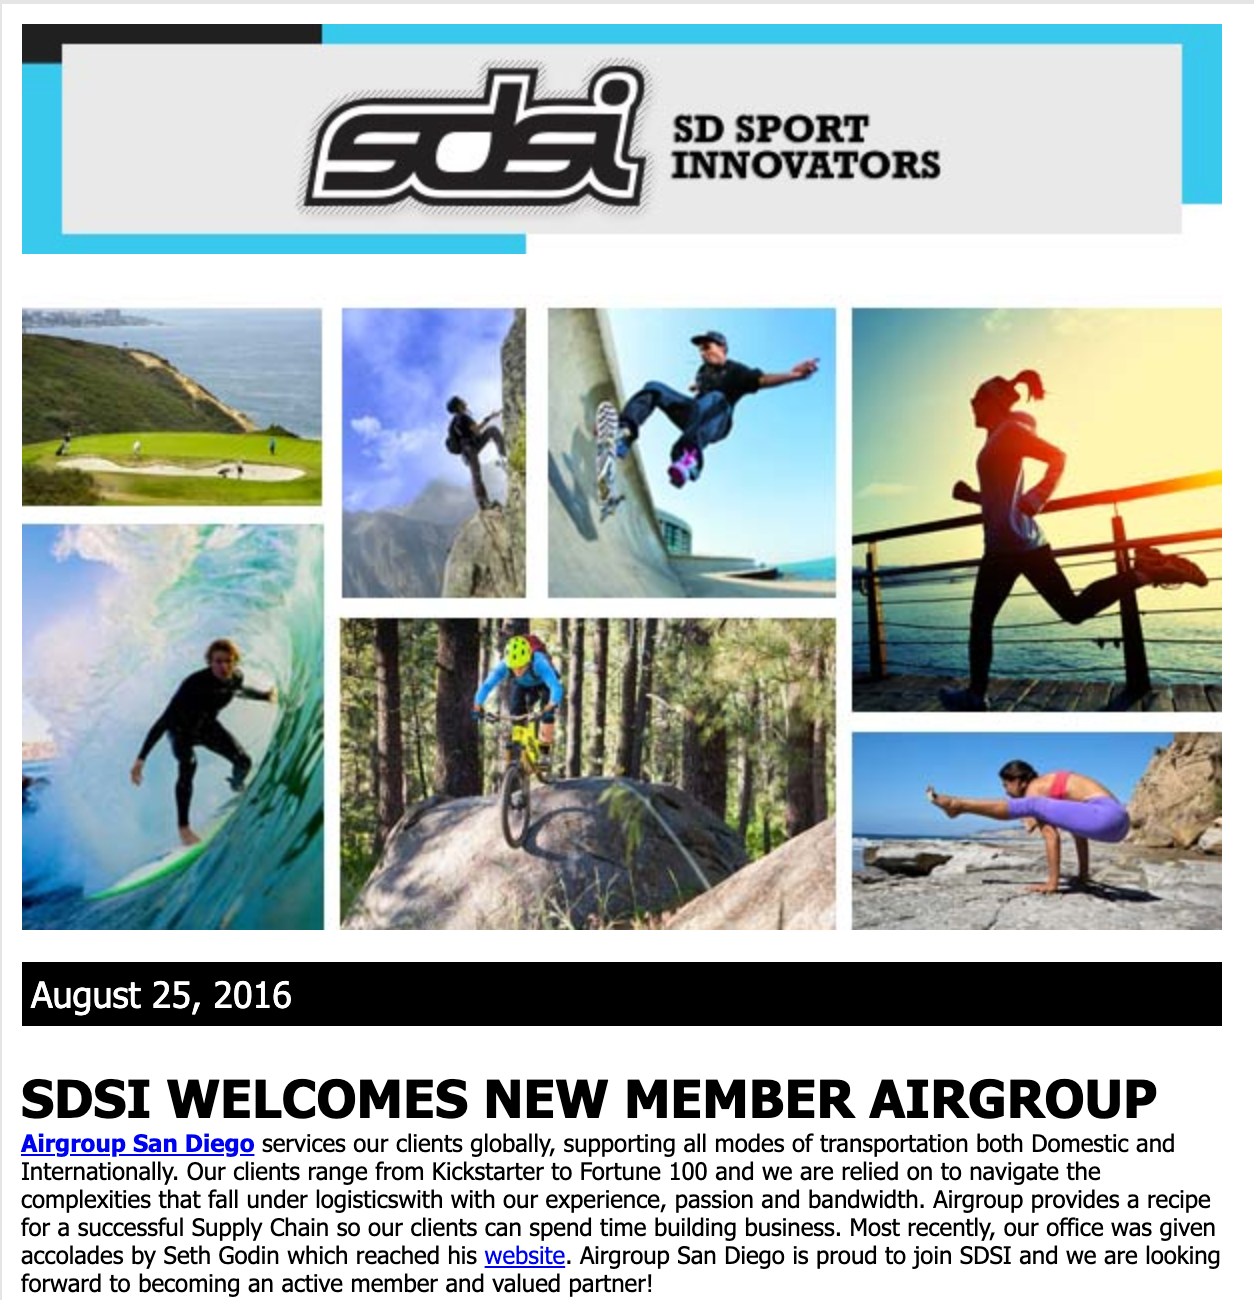 SAN DIEGO SPORTS INNOVATORS, AUGUST 25, 2016: SDSI WELCOMES NEW MEMBER AIRGROUP